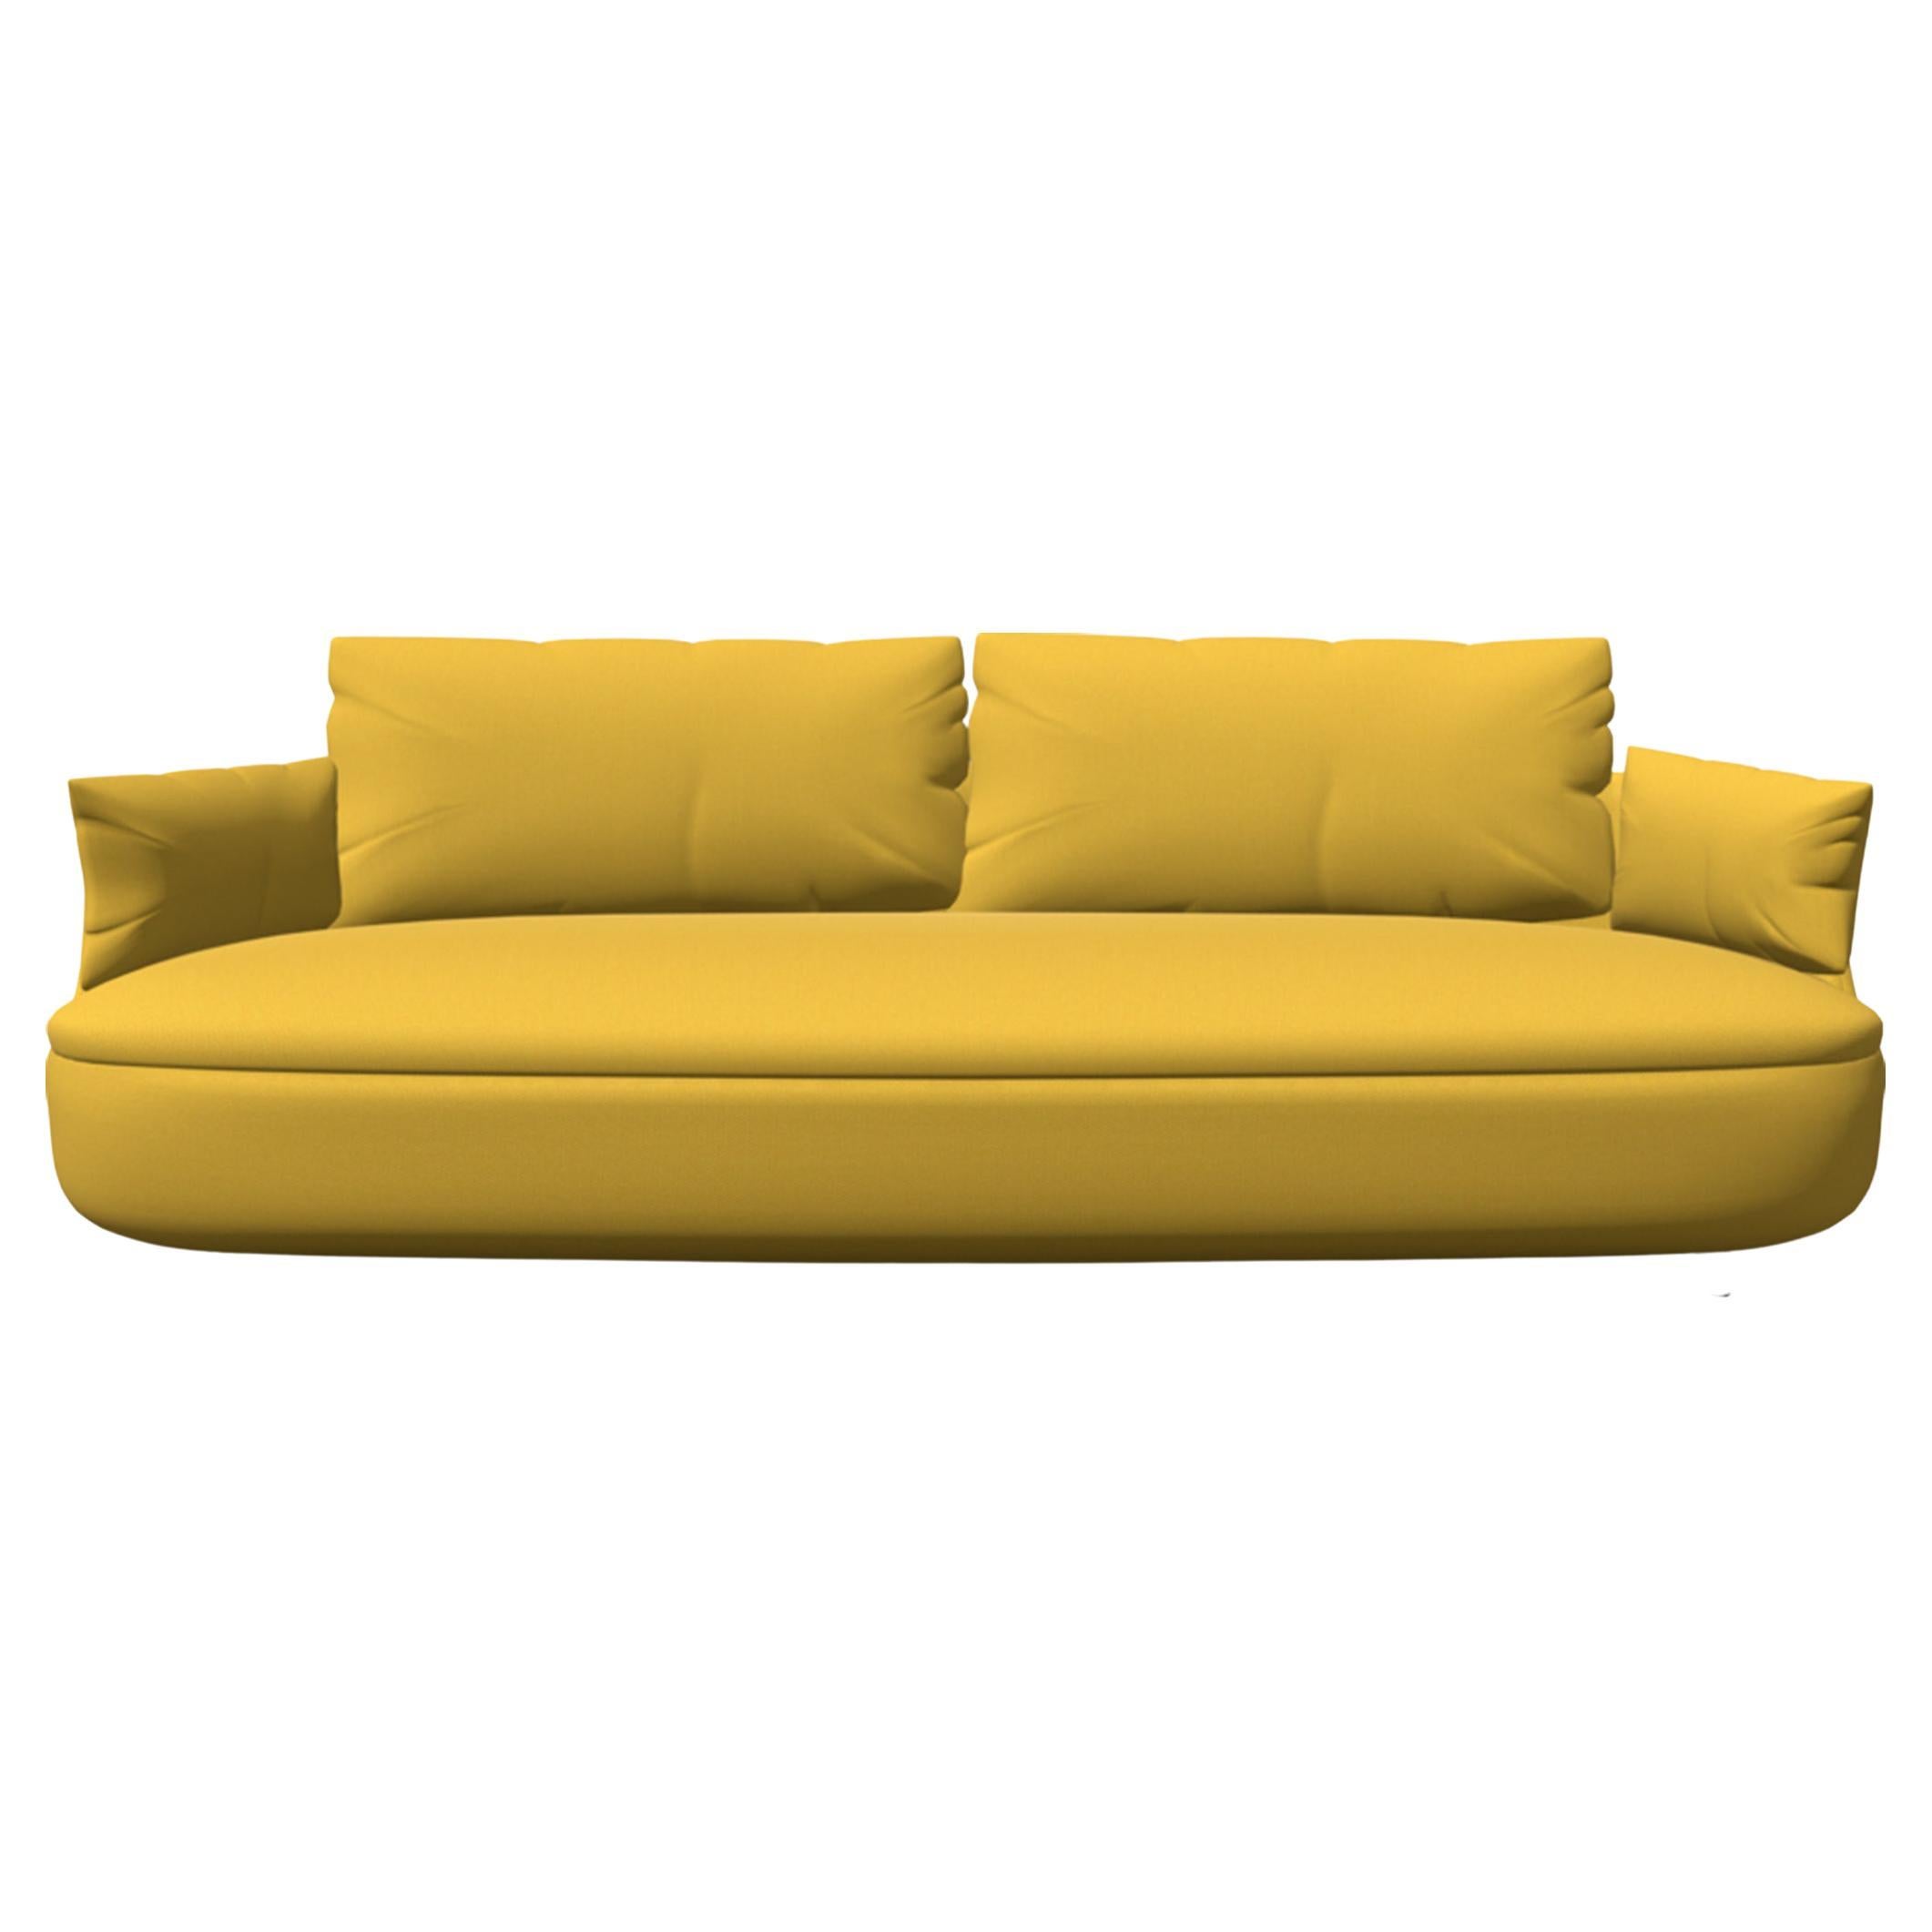 Moooi Bart Canape Sofa in Divina 3, 426 Yellow Upholstery